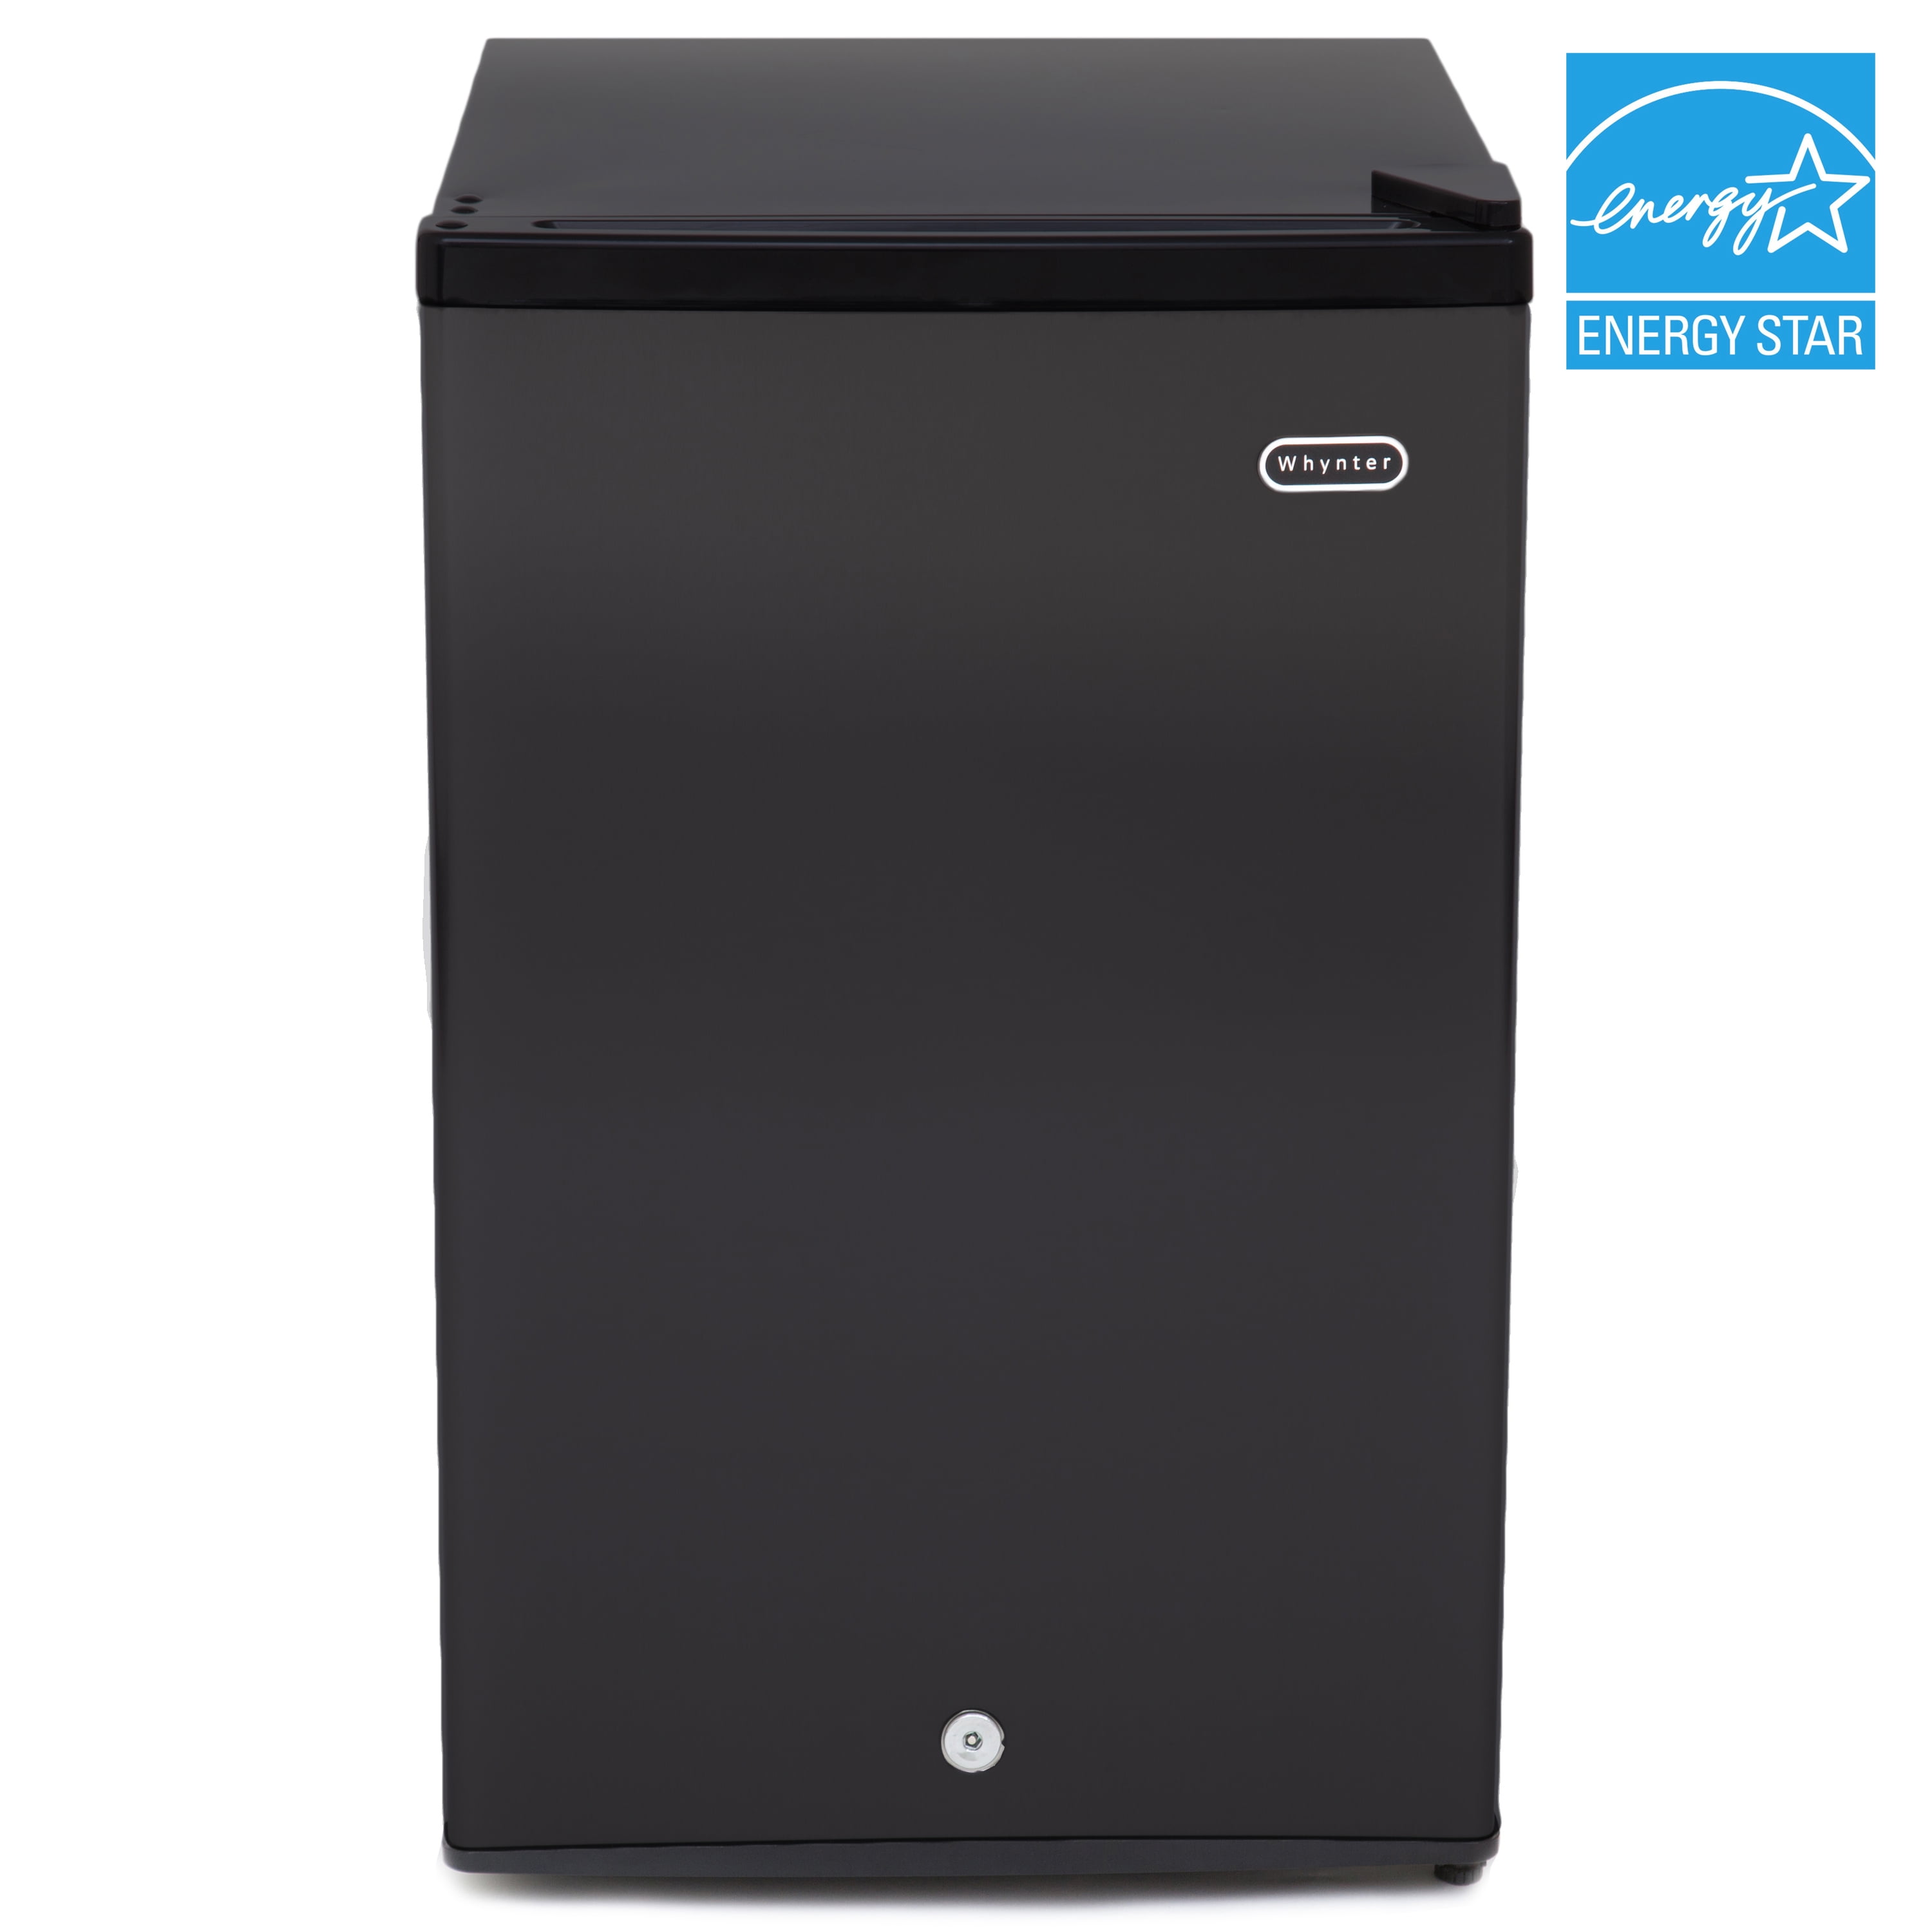 Photo 1 of Whynter 3.0 cu. ft. Energy Star Upright Freezer with Lock - Black